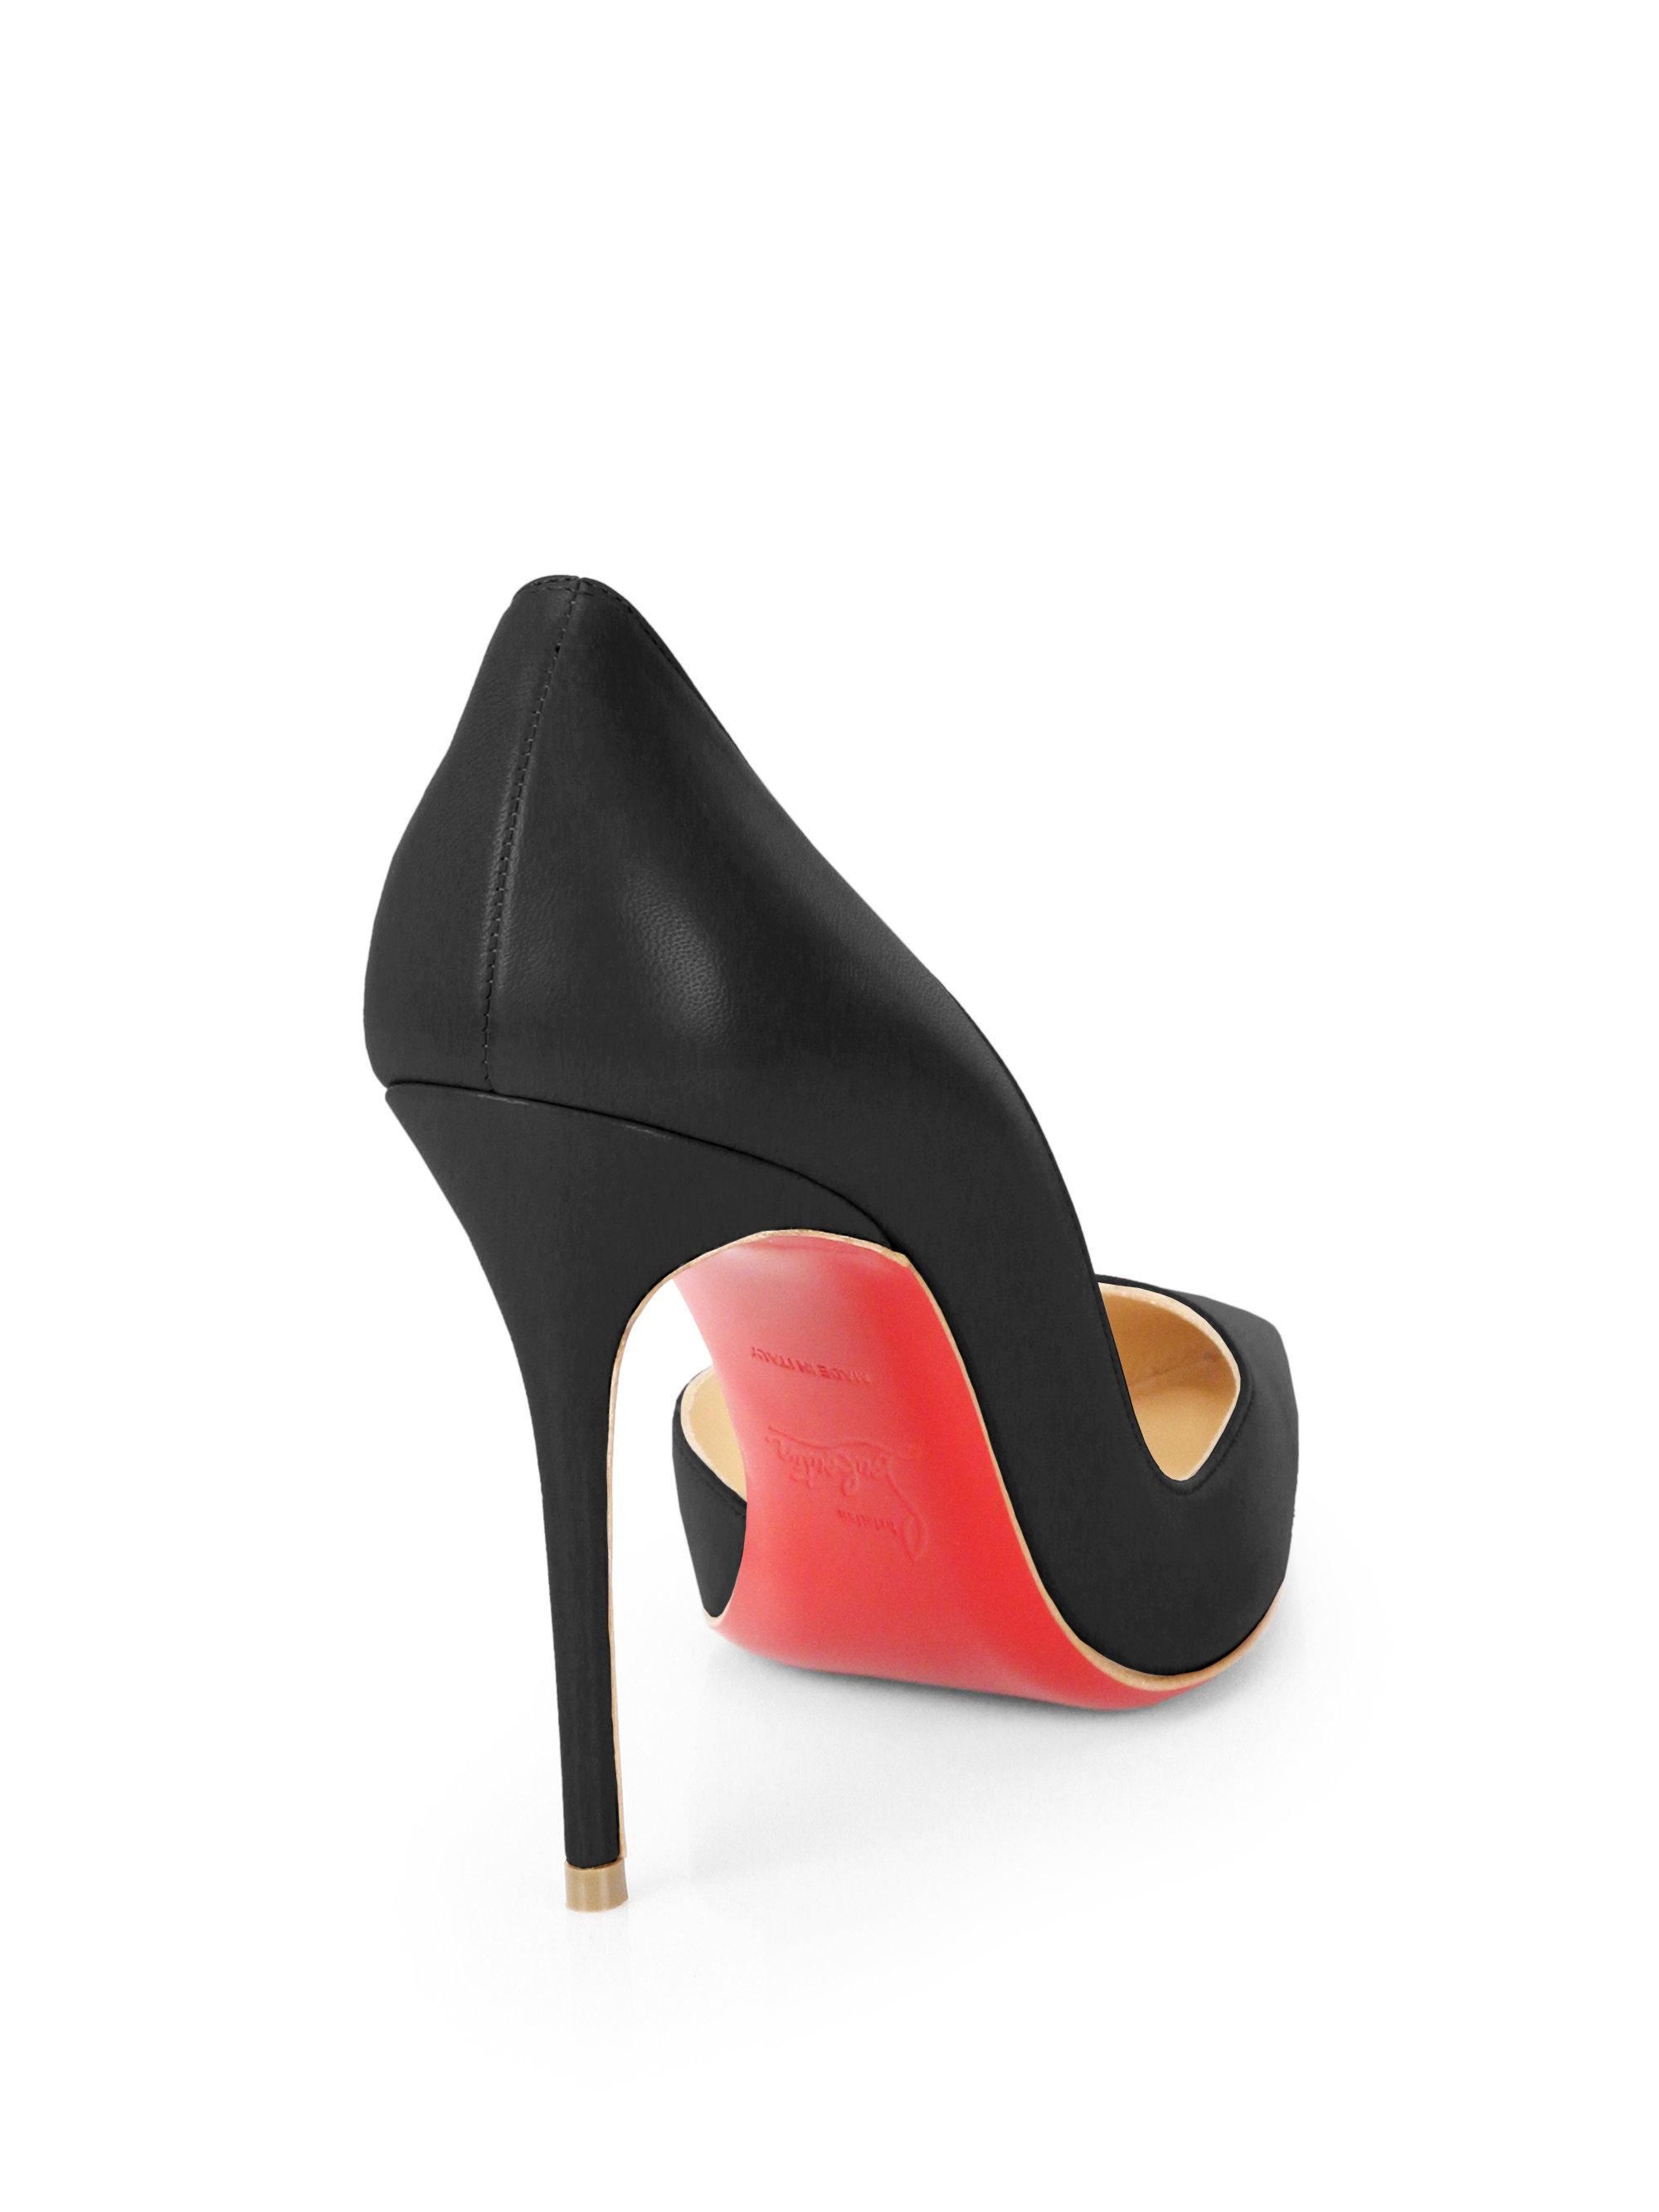 Lyst - Christian Louboutin Iriza Leather D'orsay Pumps in Black